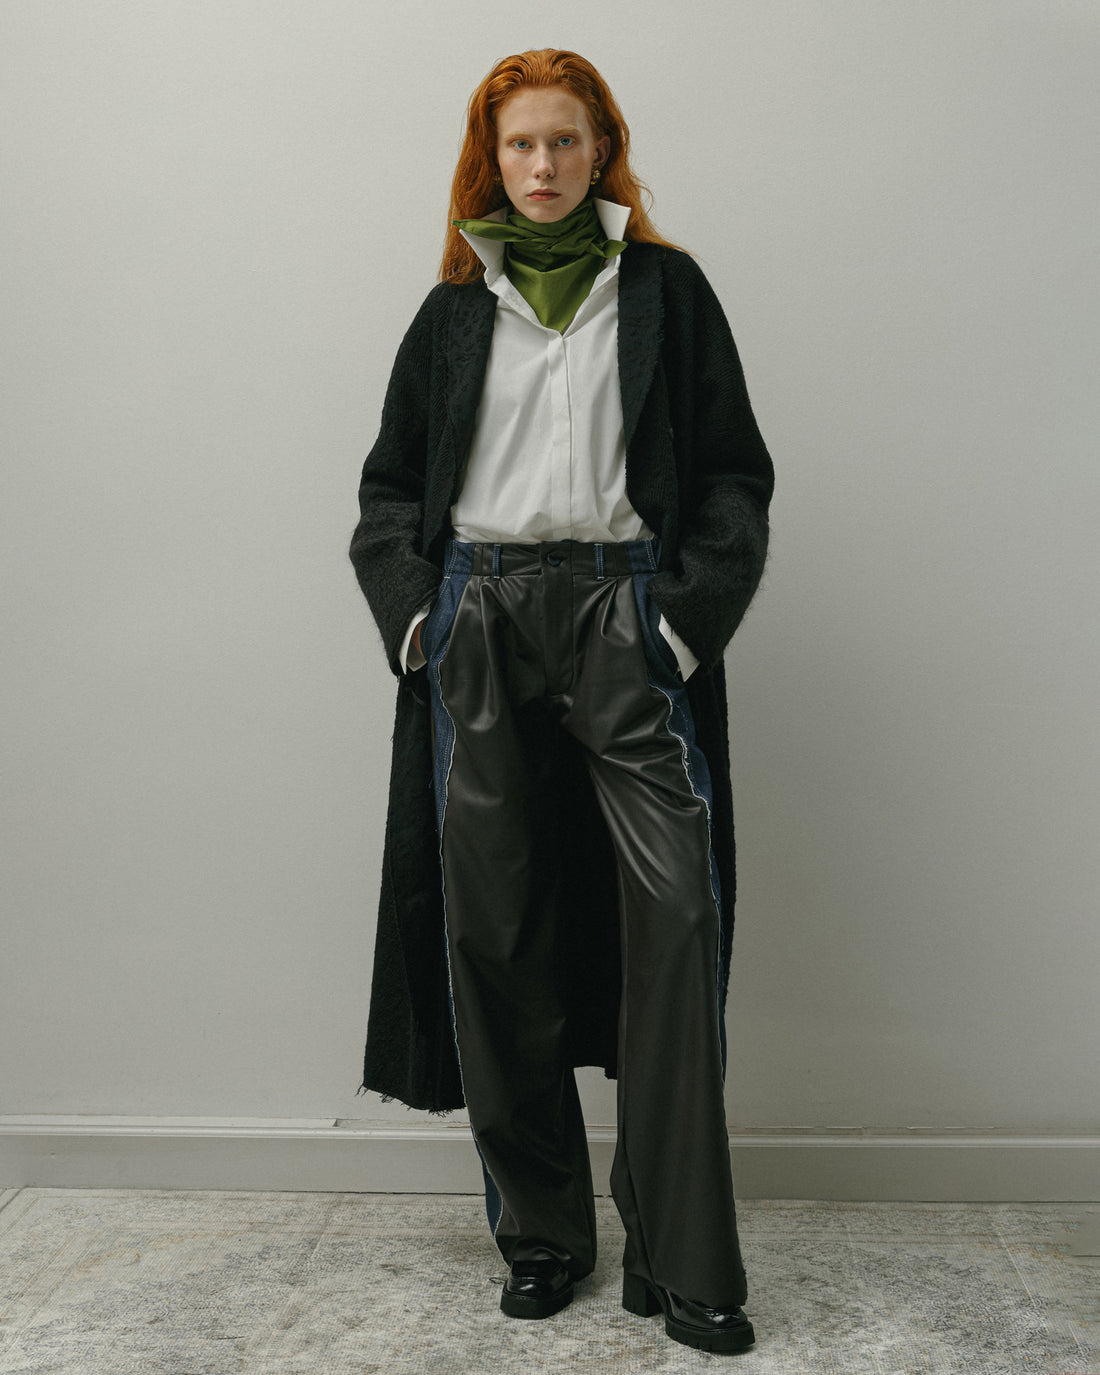 ECO LEATHER PANTS WITH JEAN SIDE DETAIL AW23/24